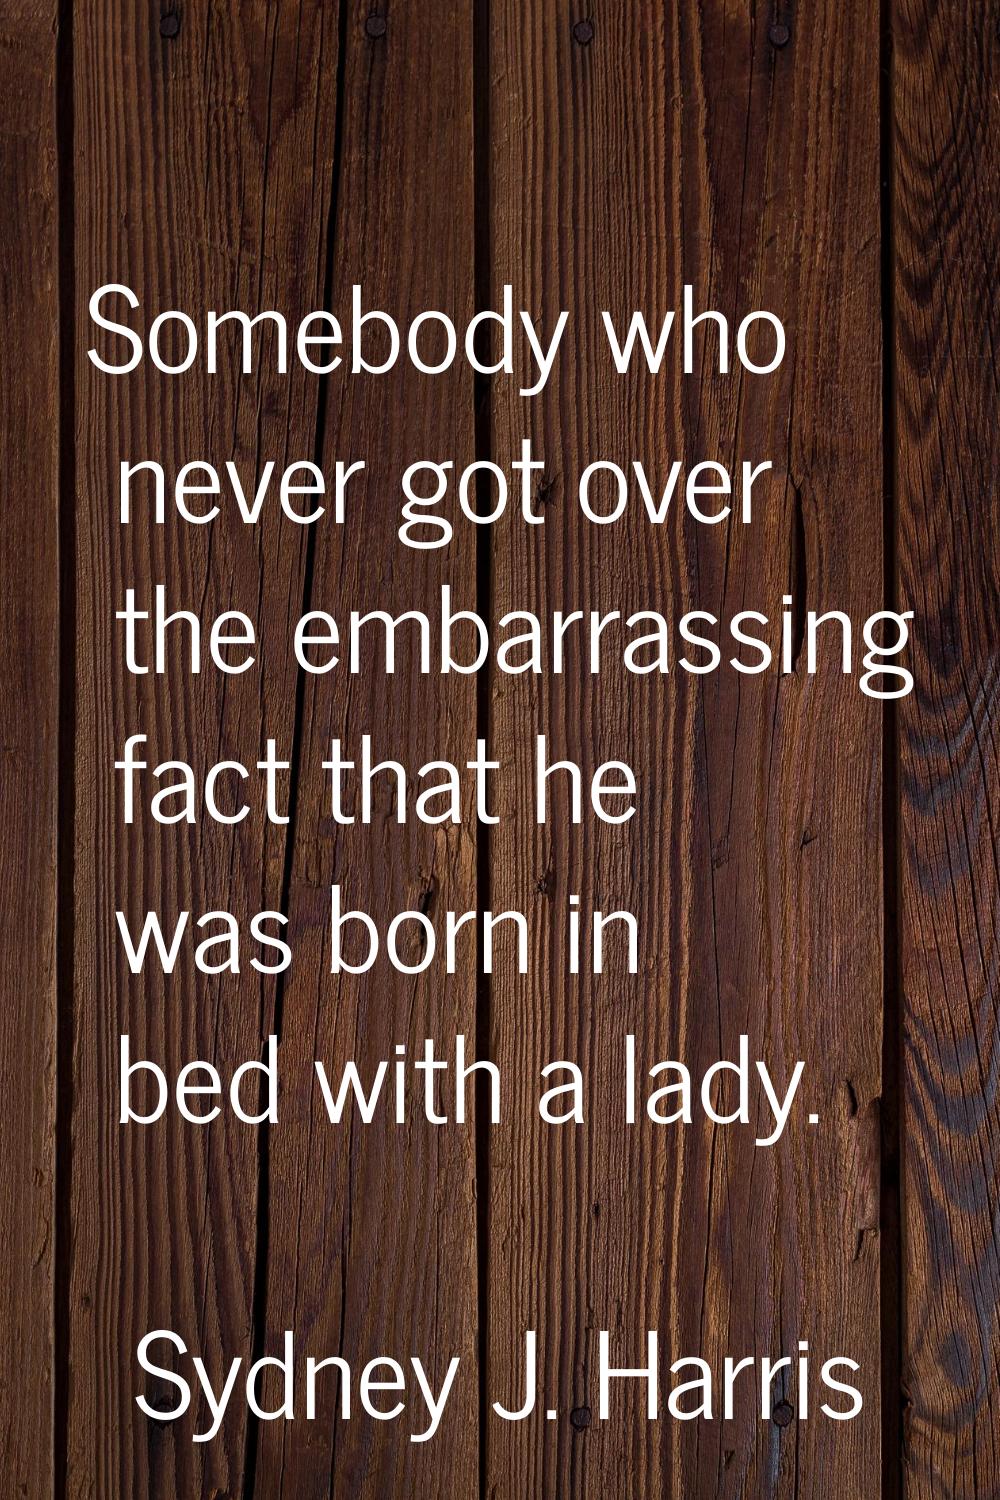 Somebody who never got over the embarrassing fact that he was born in bed with a lady.